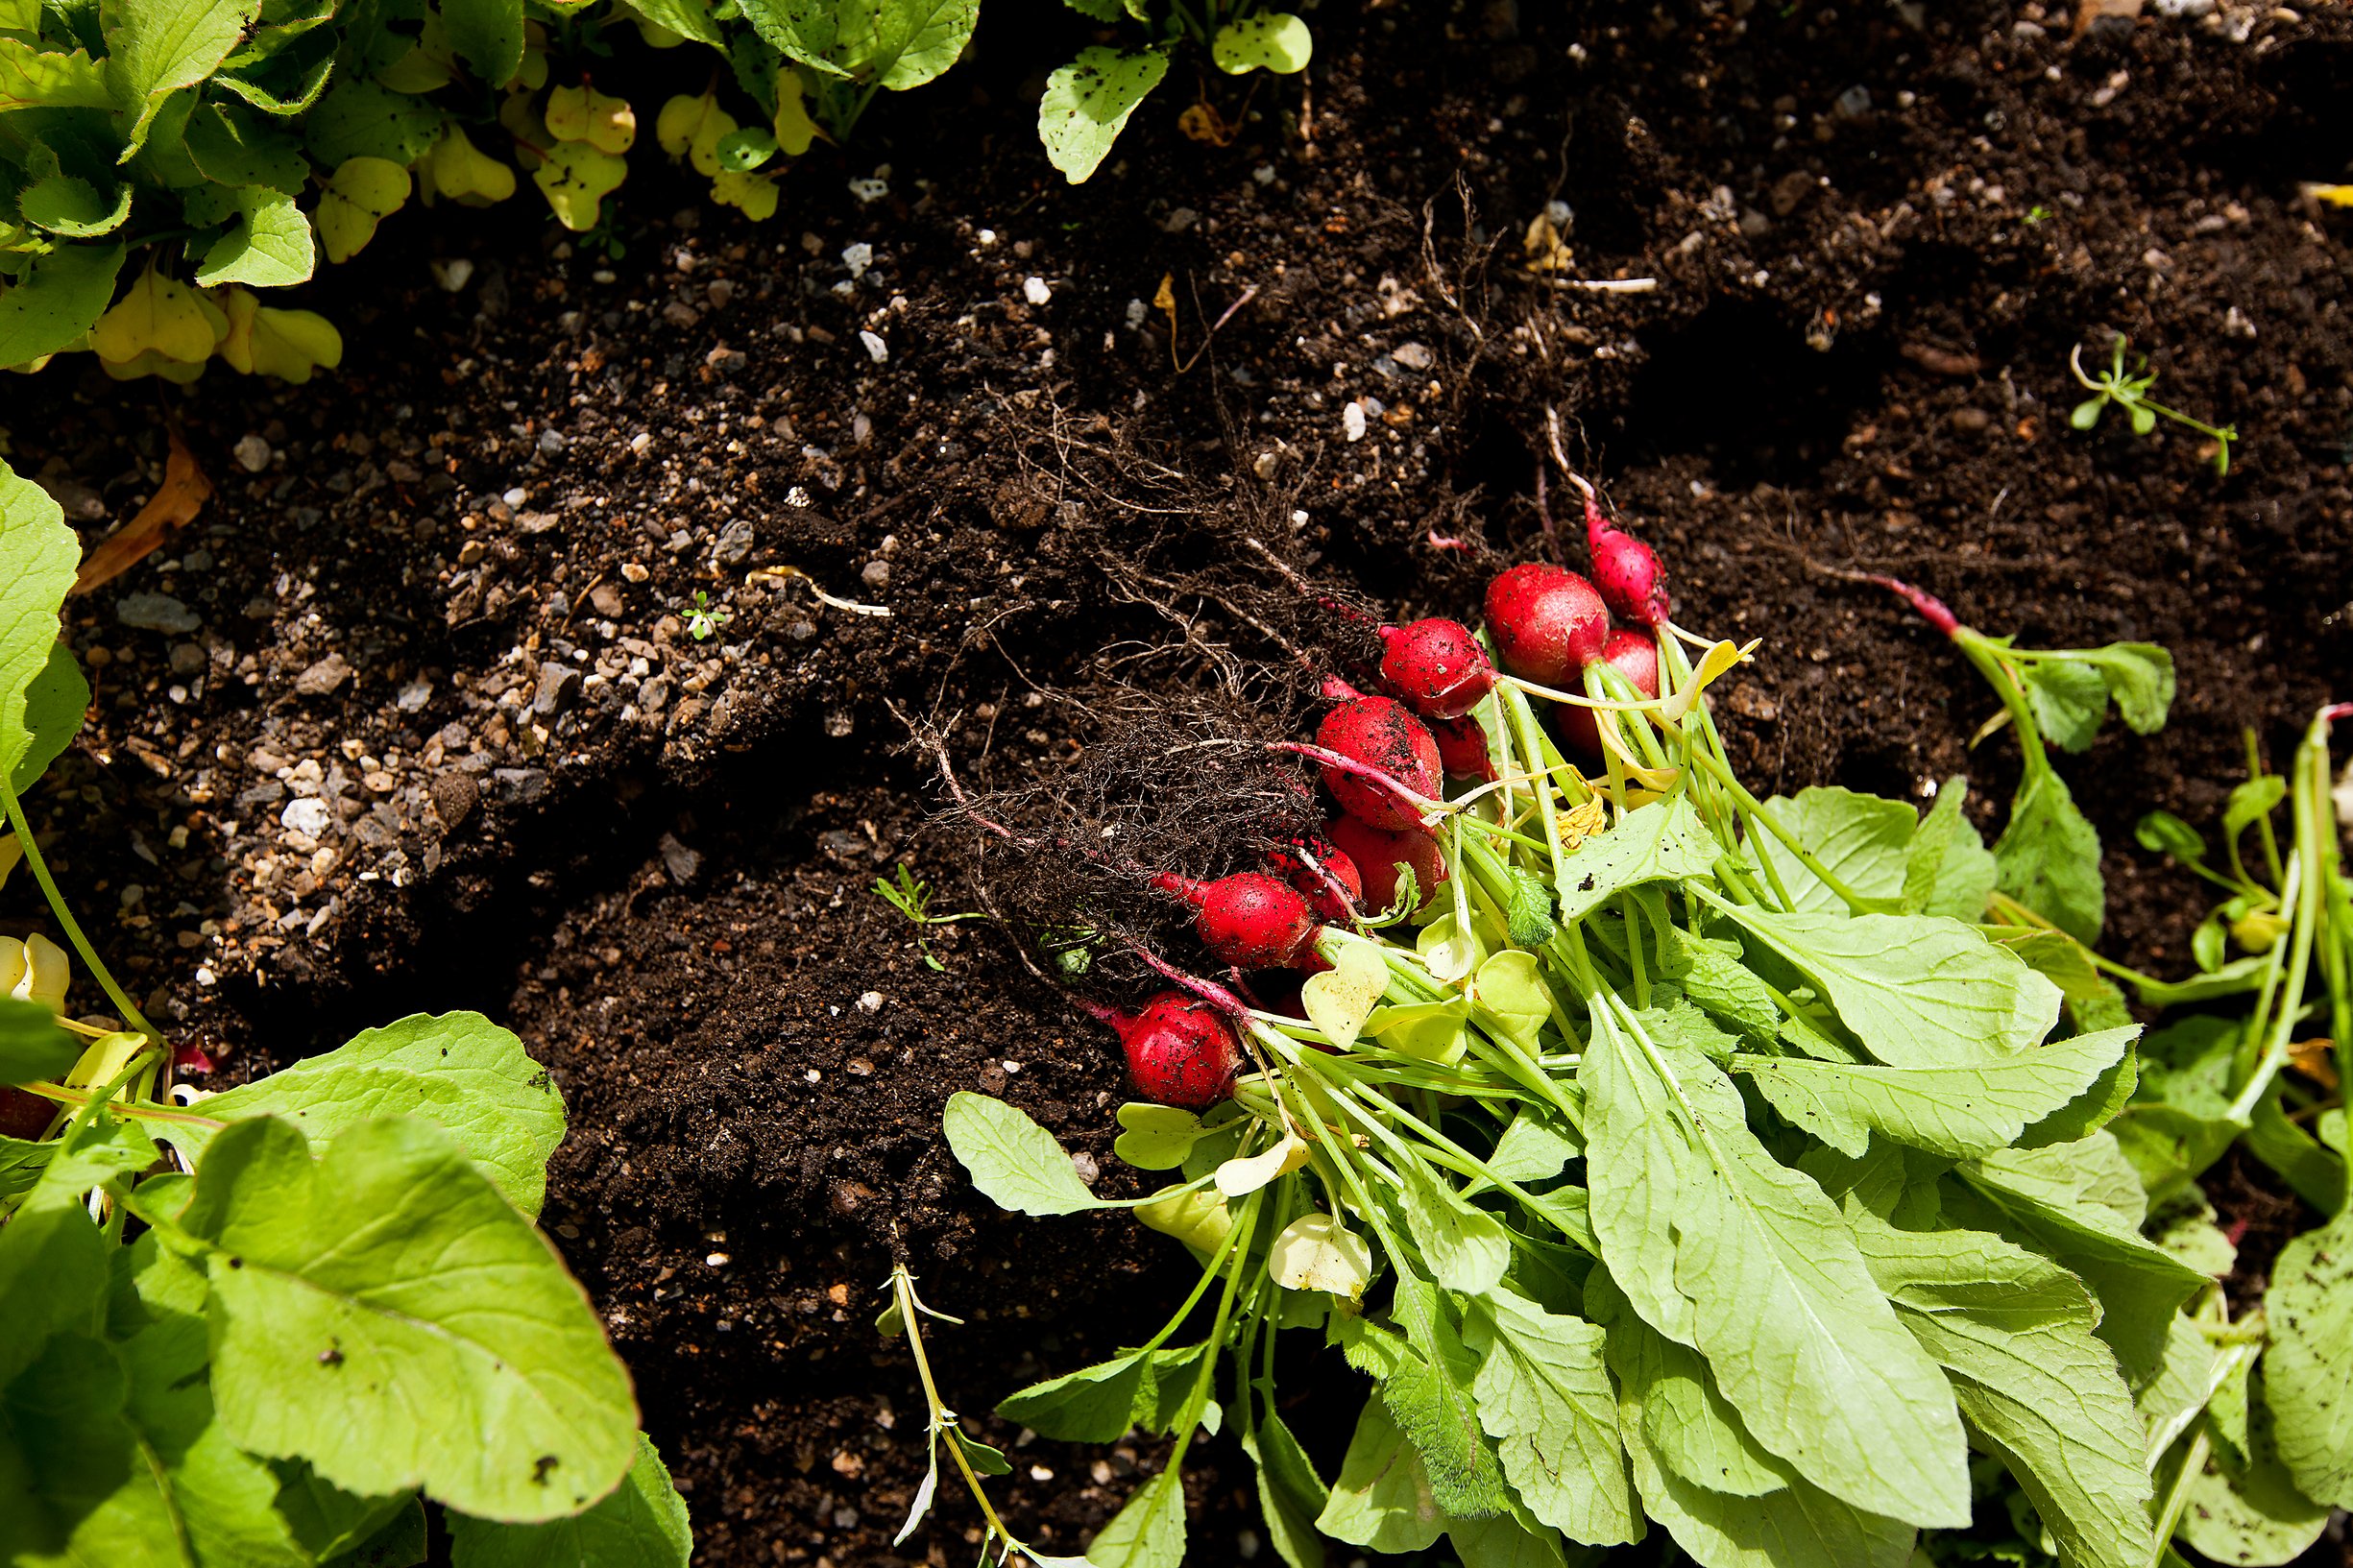 Radishes grown on a rooftop farm freshly picked from rooflite soil. Photo: rooflite